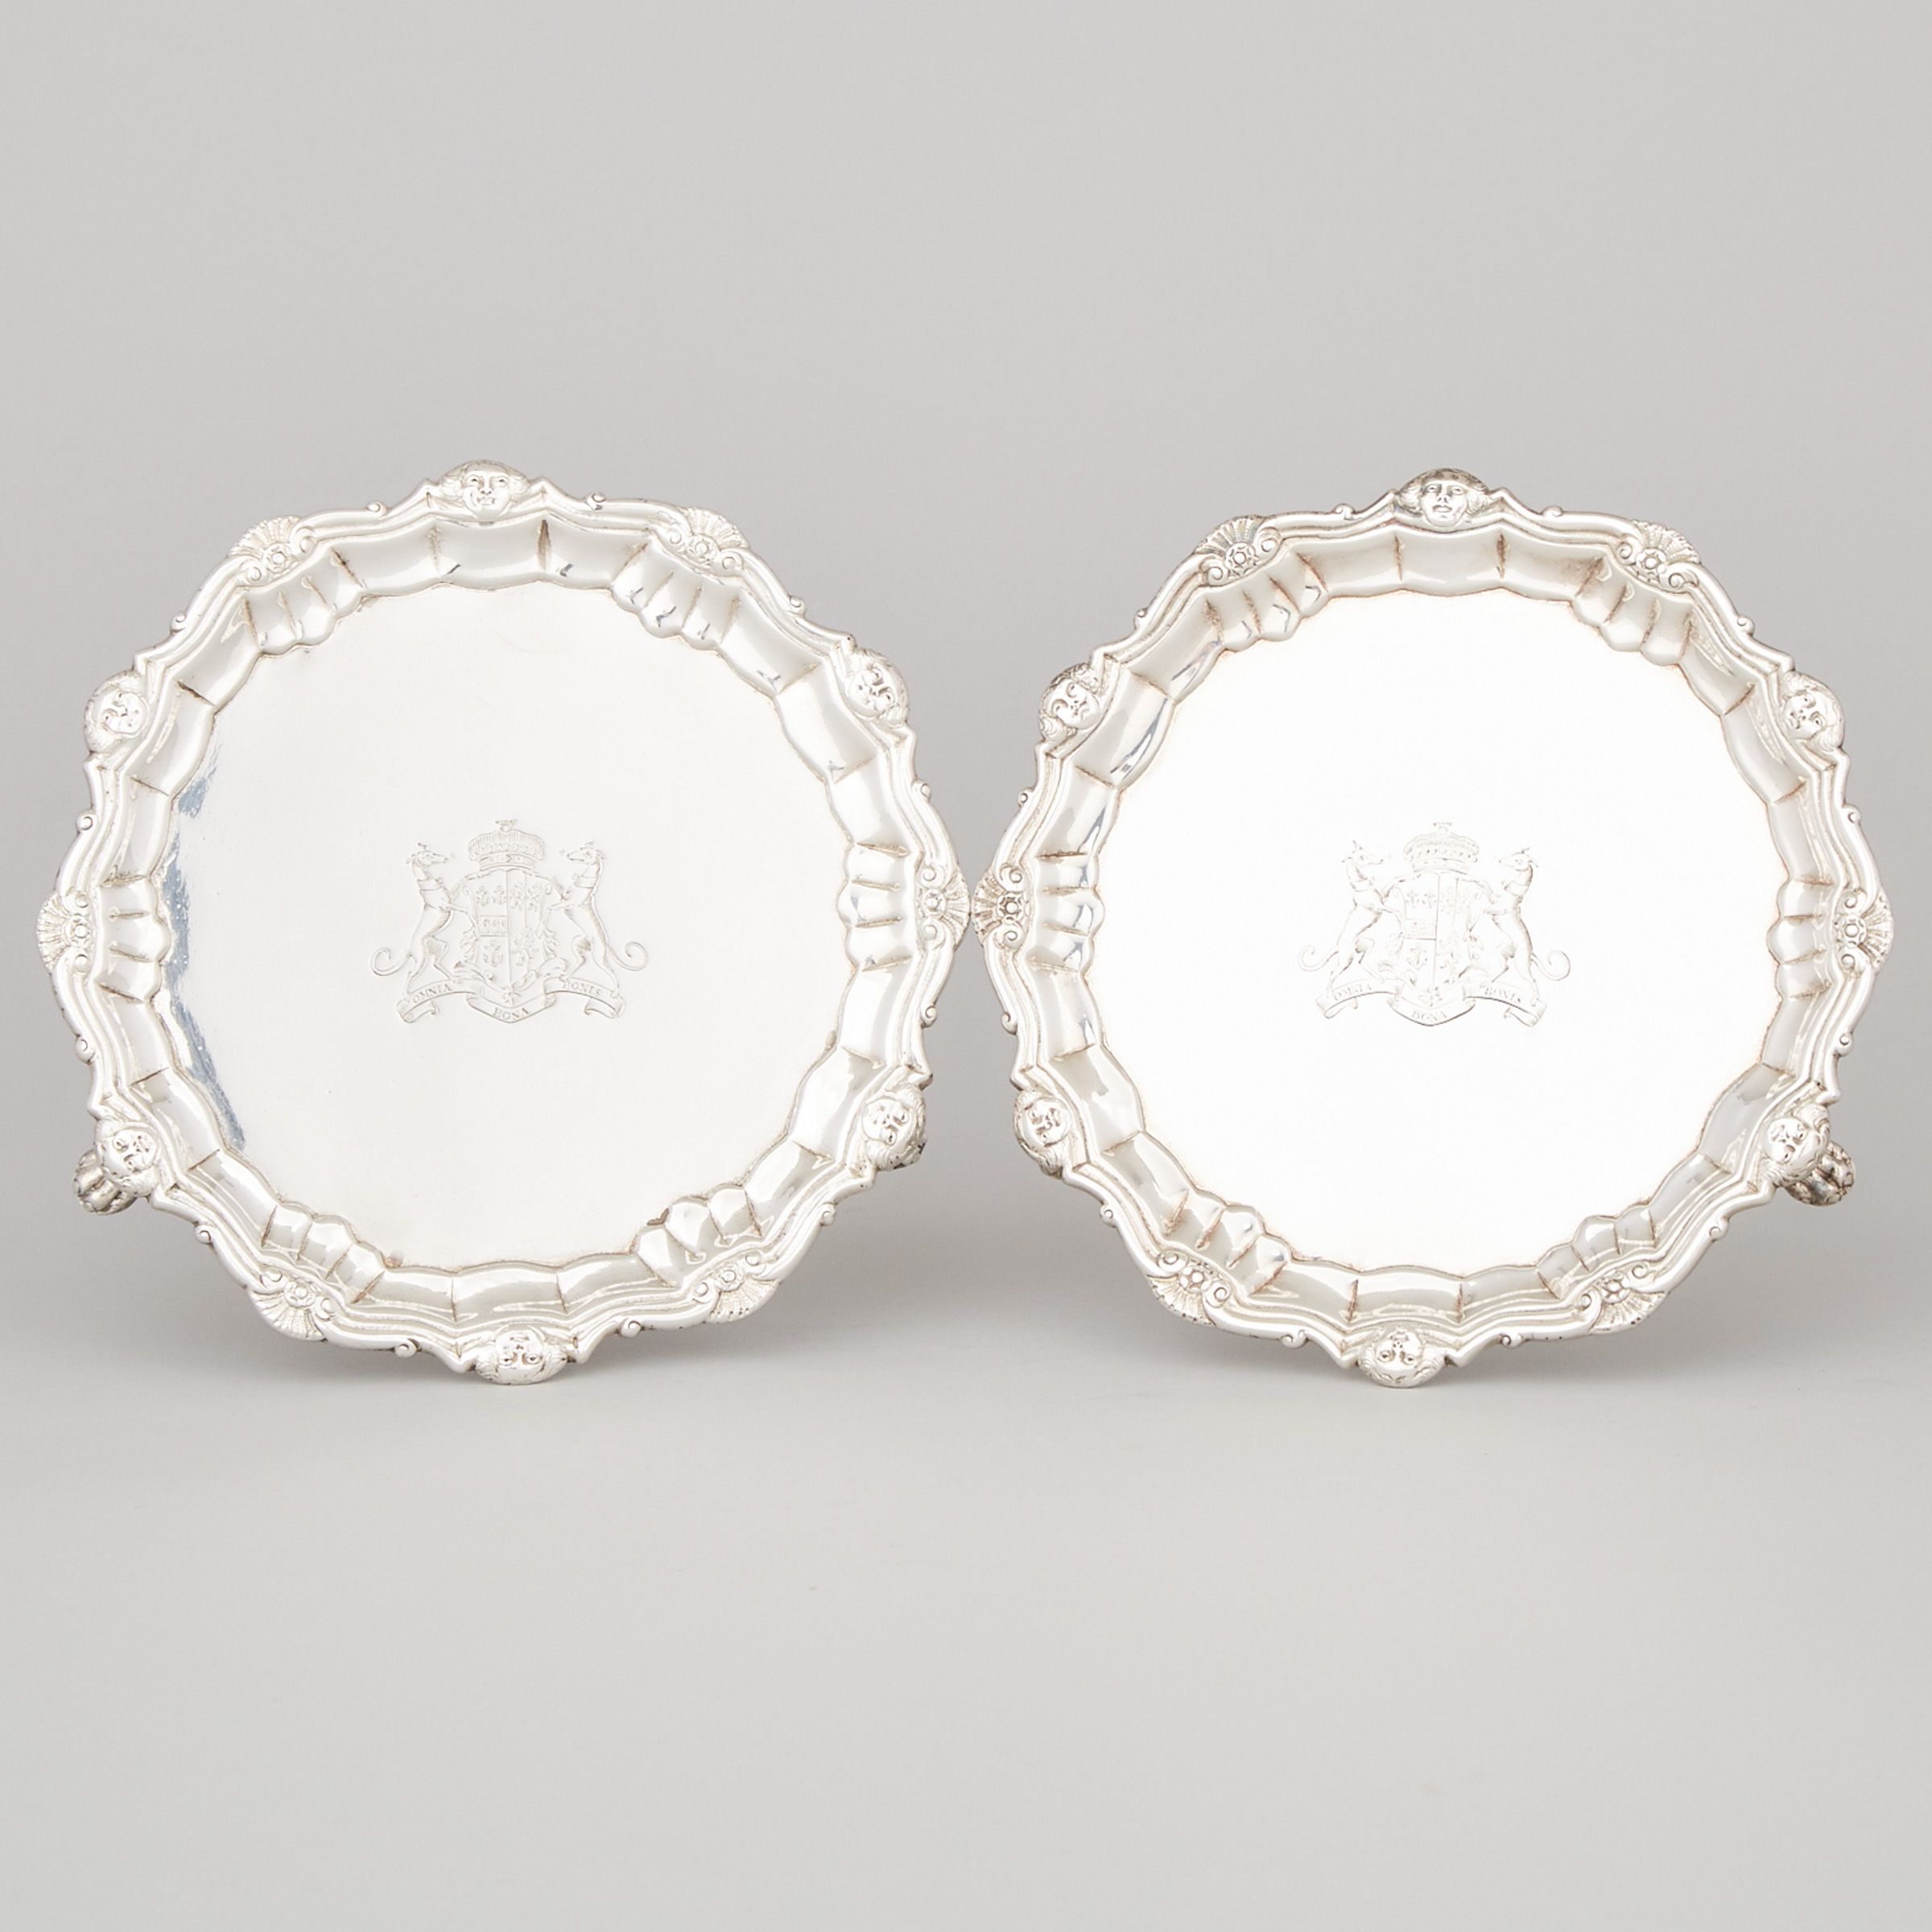 Pair of George II Silver Small Circular Salvers, Robert Abercromby, London, 1741